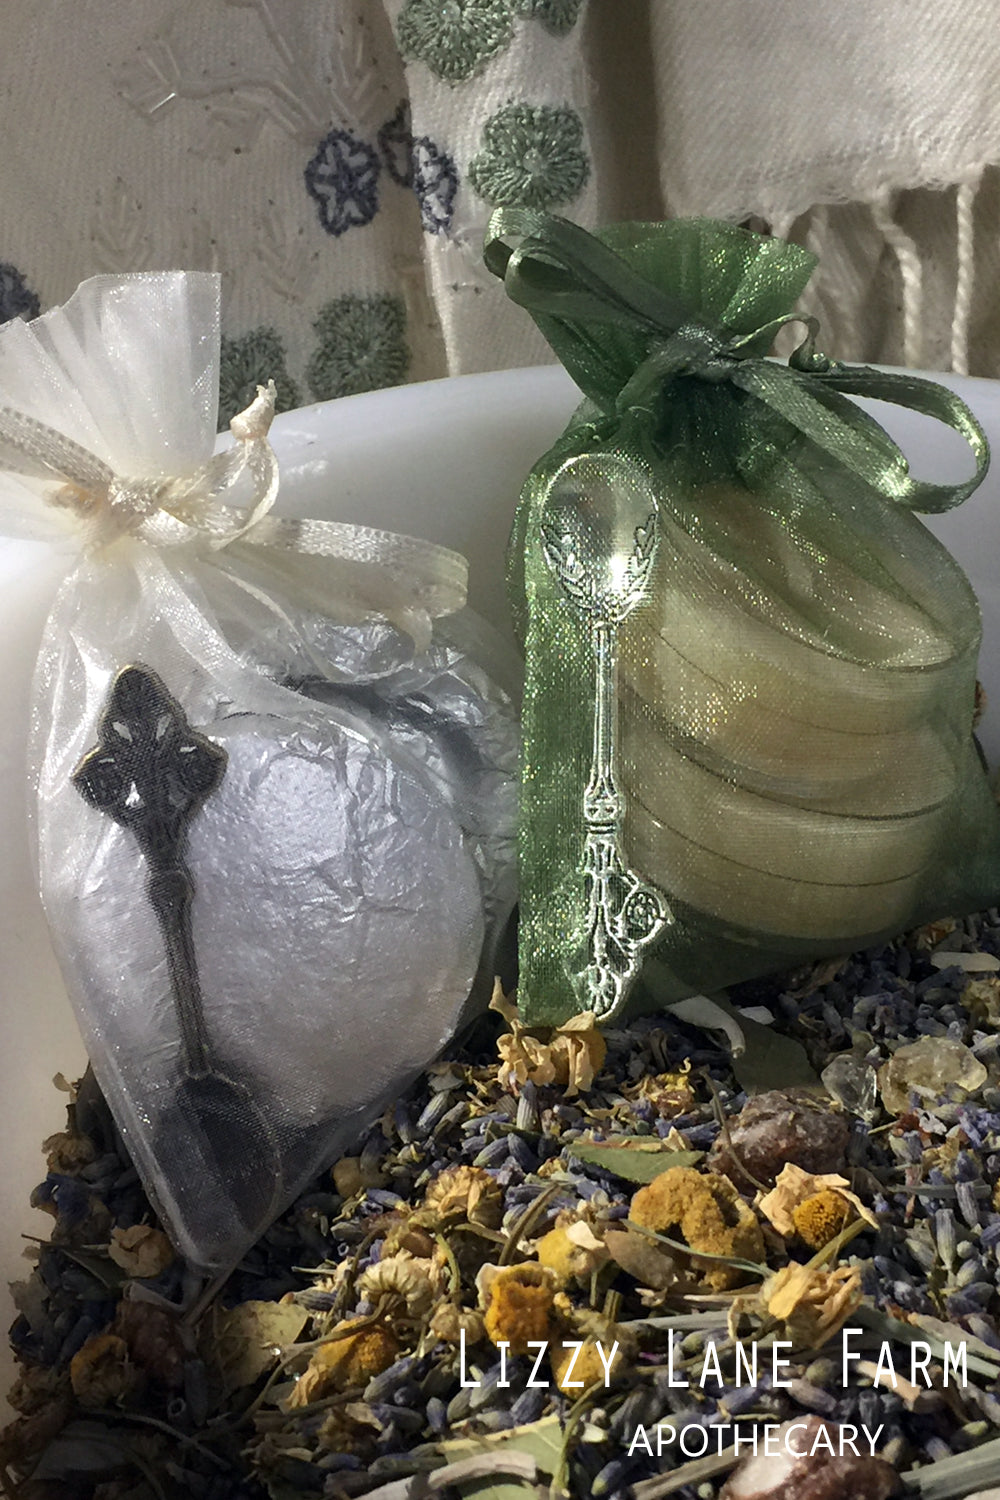 Incense Burning Kit | Tiny Incense Spoon, Charcoal, Beeswax Tealights